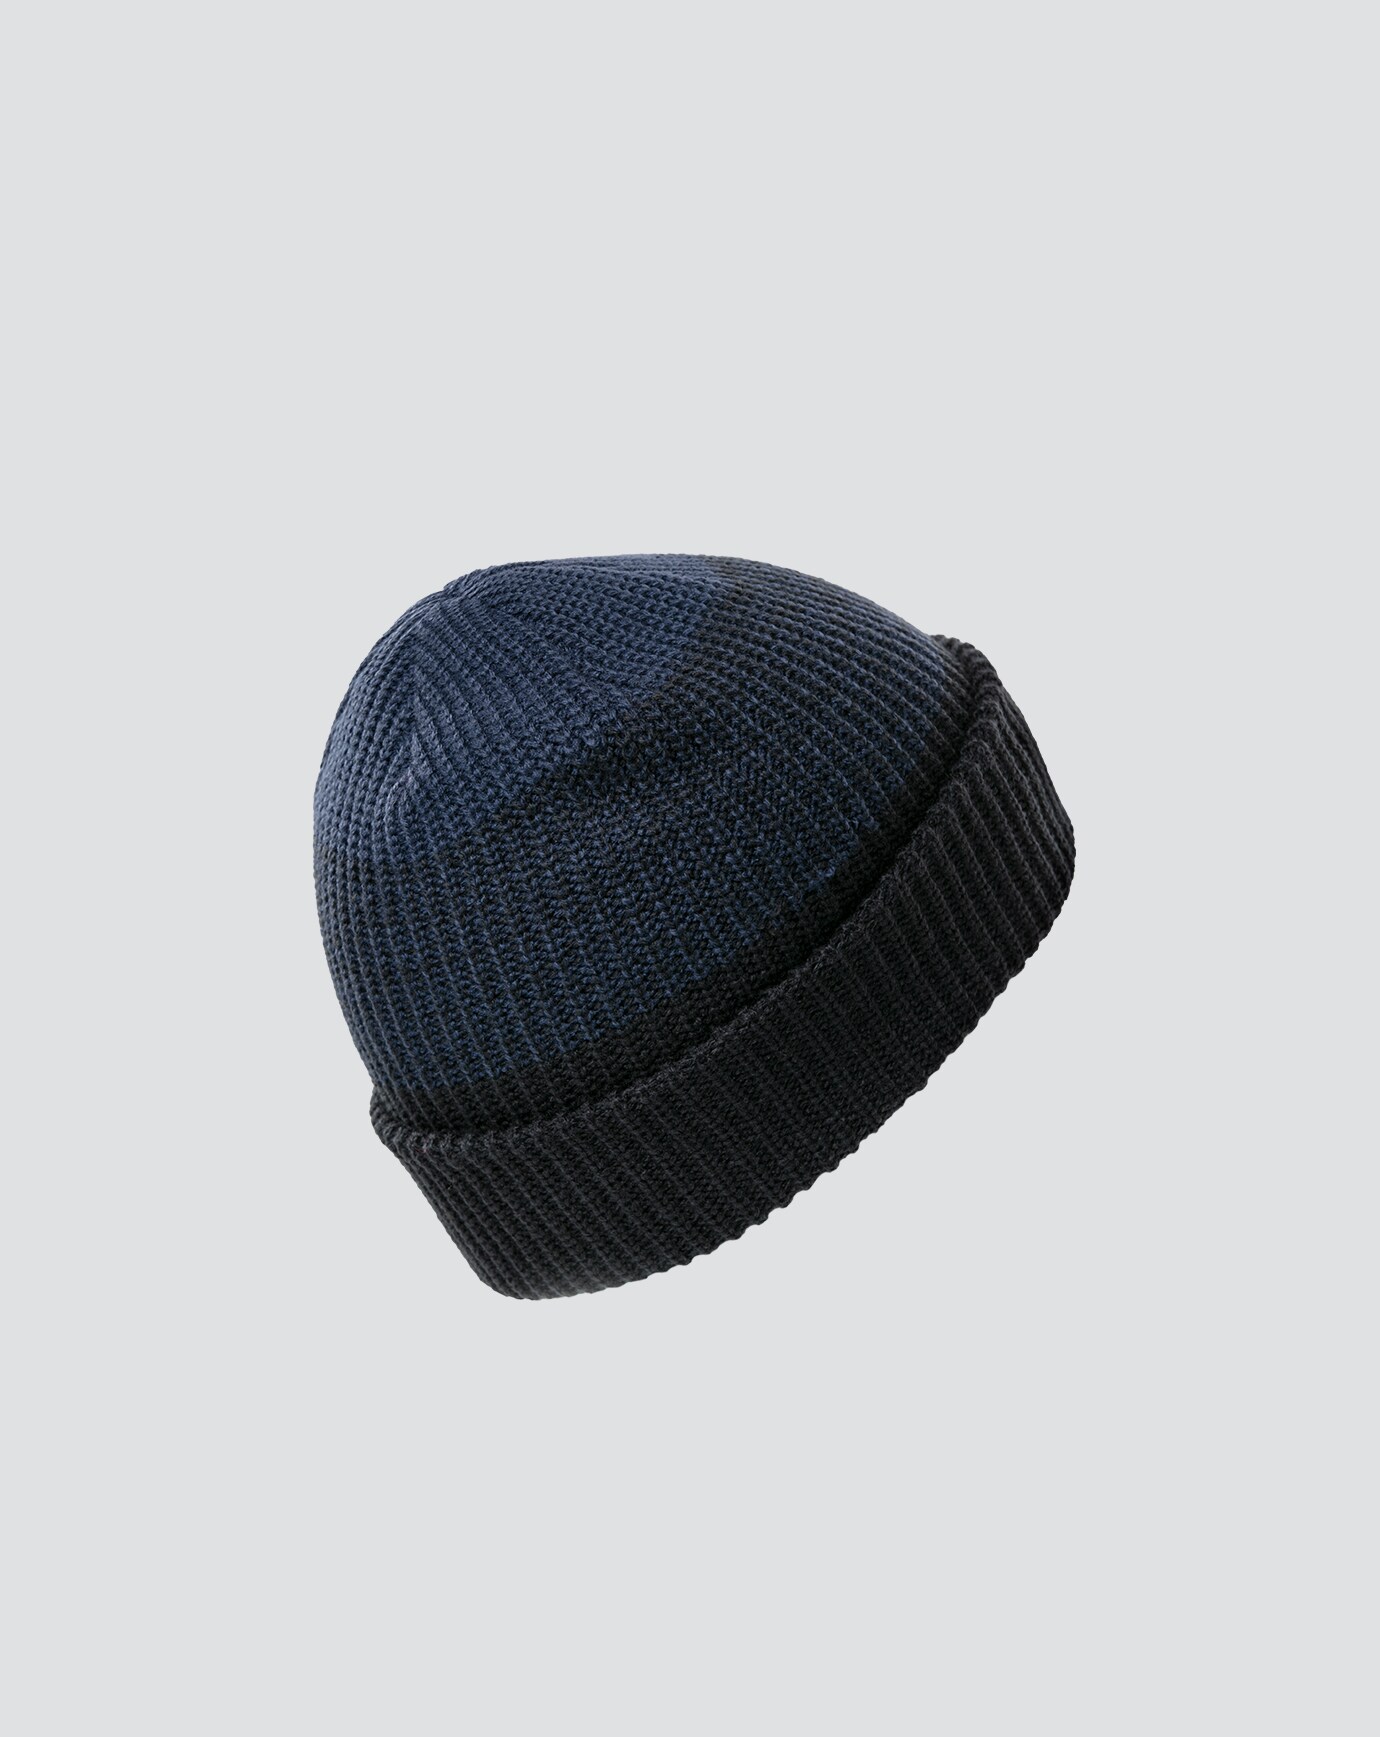 PREVAILING WINDS BEANIE Image 3